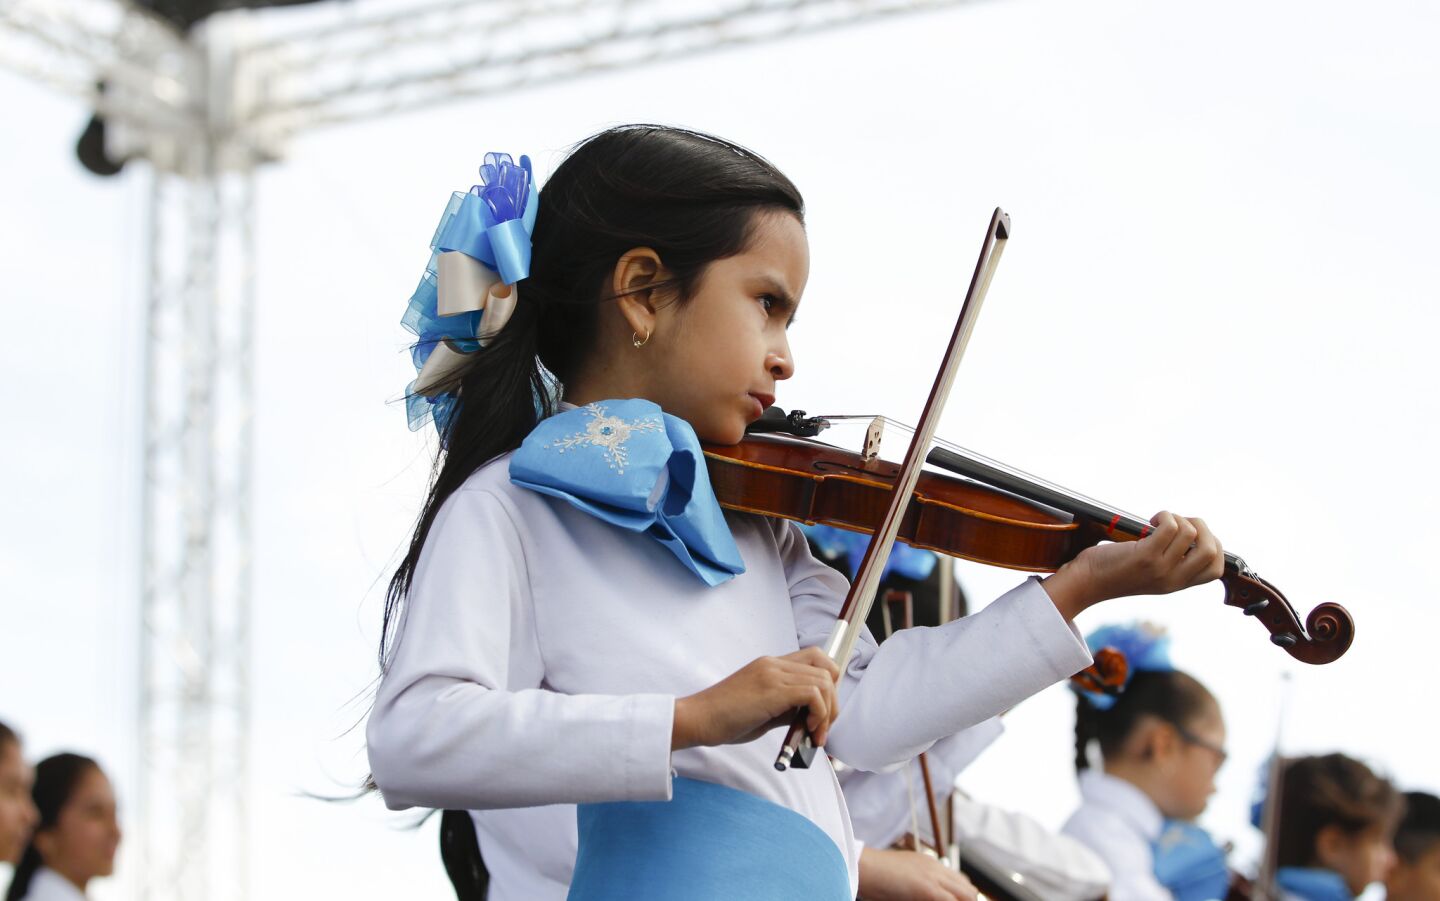 A young girl from National City School District, grades 1 through 8 performed at the annual International Mariachi Festival in National City.